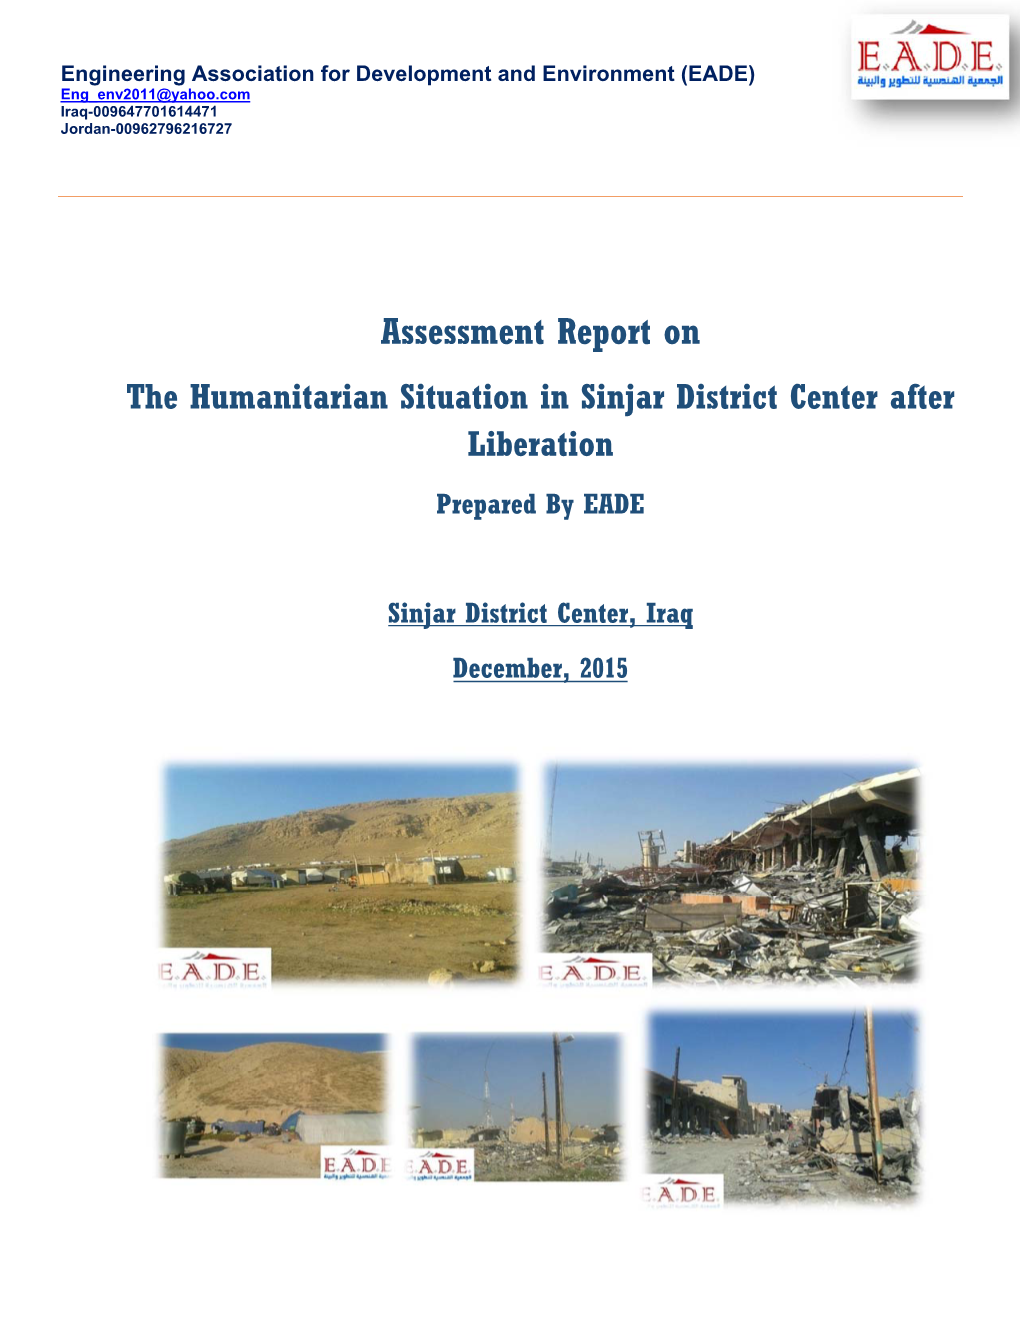 Assessment Report on the Humanitarian Situation in Sinjar District Center After Liberation Prepared by EADE